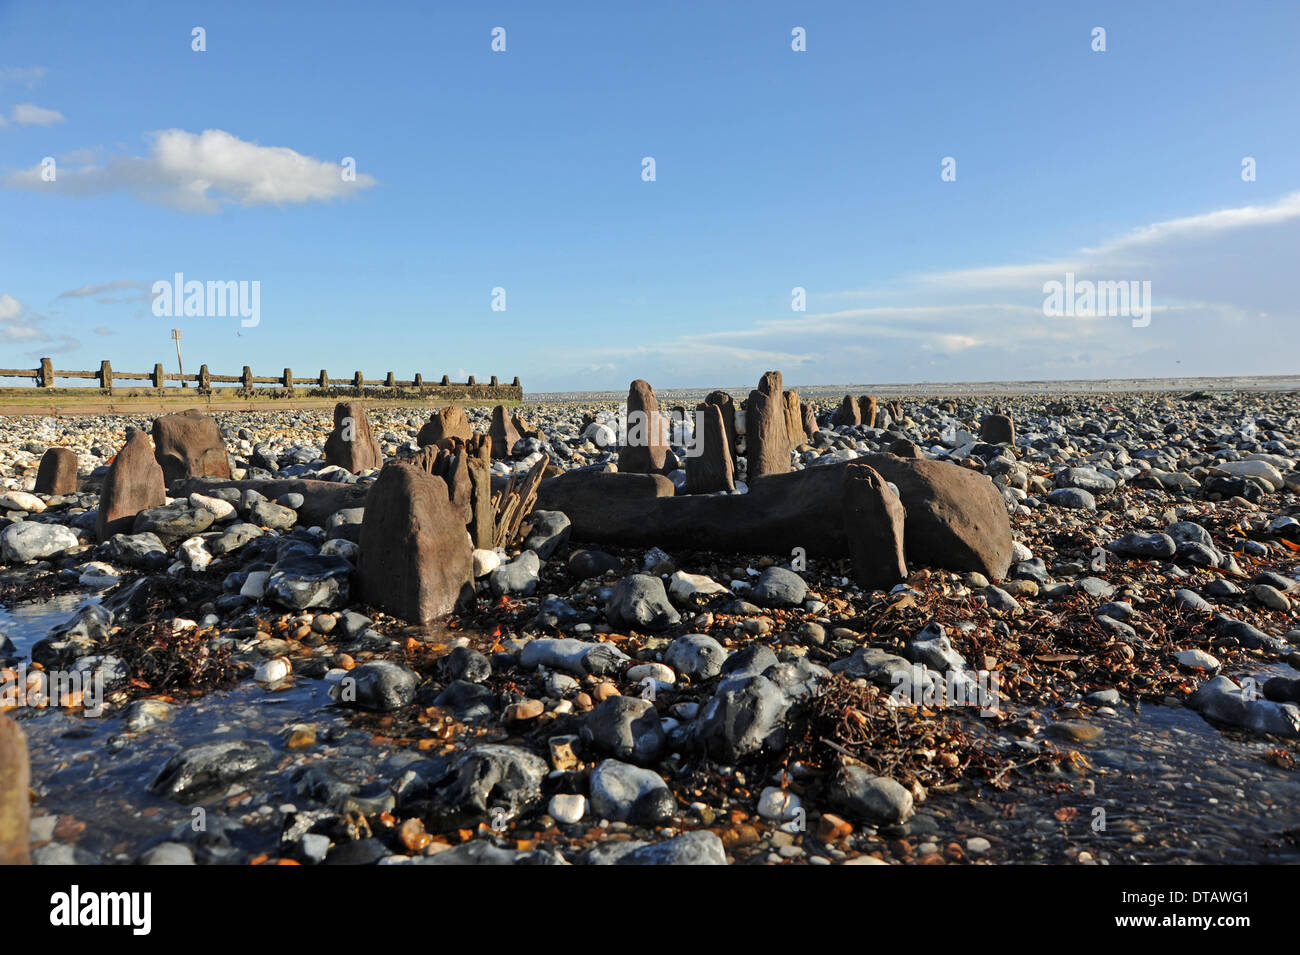 The recent storms and high tides have unearthed old World War 2 sea defences along the beaches at Ferring near Worthing UK Stock Photo